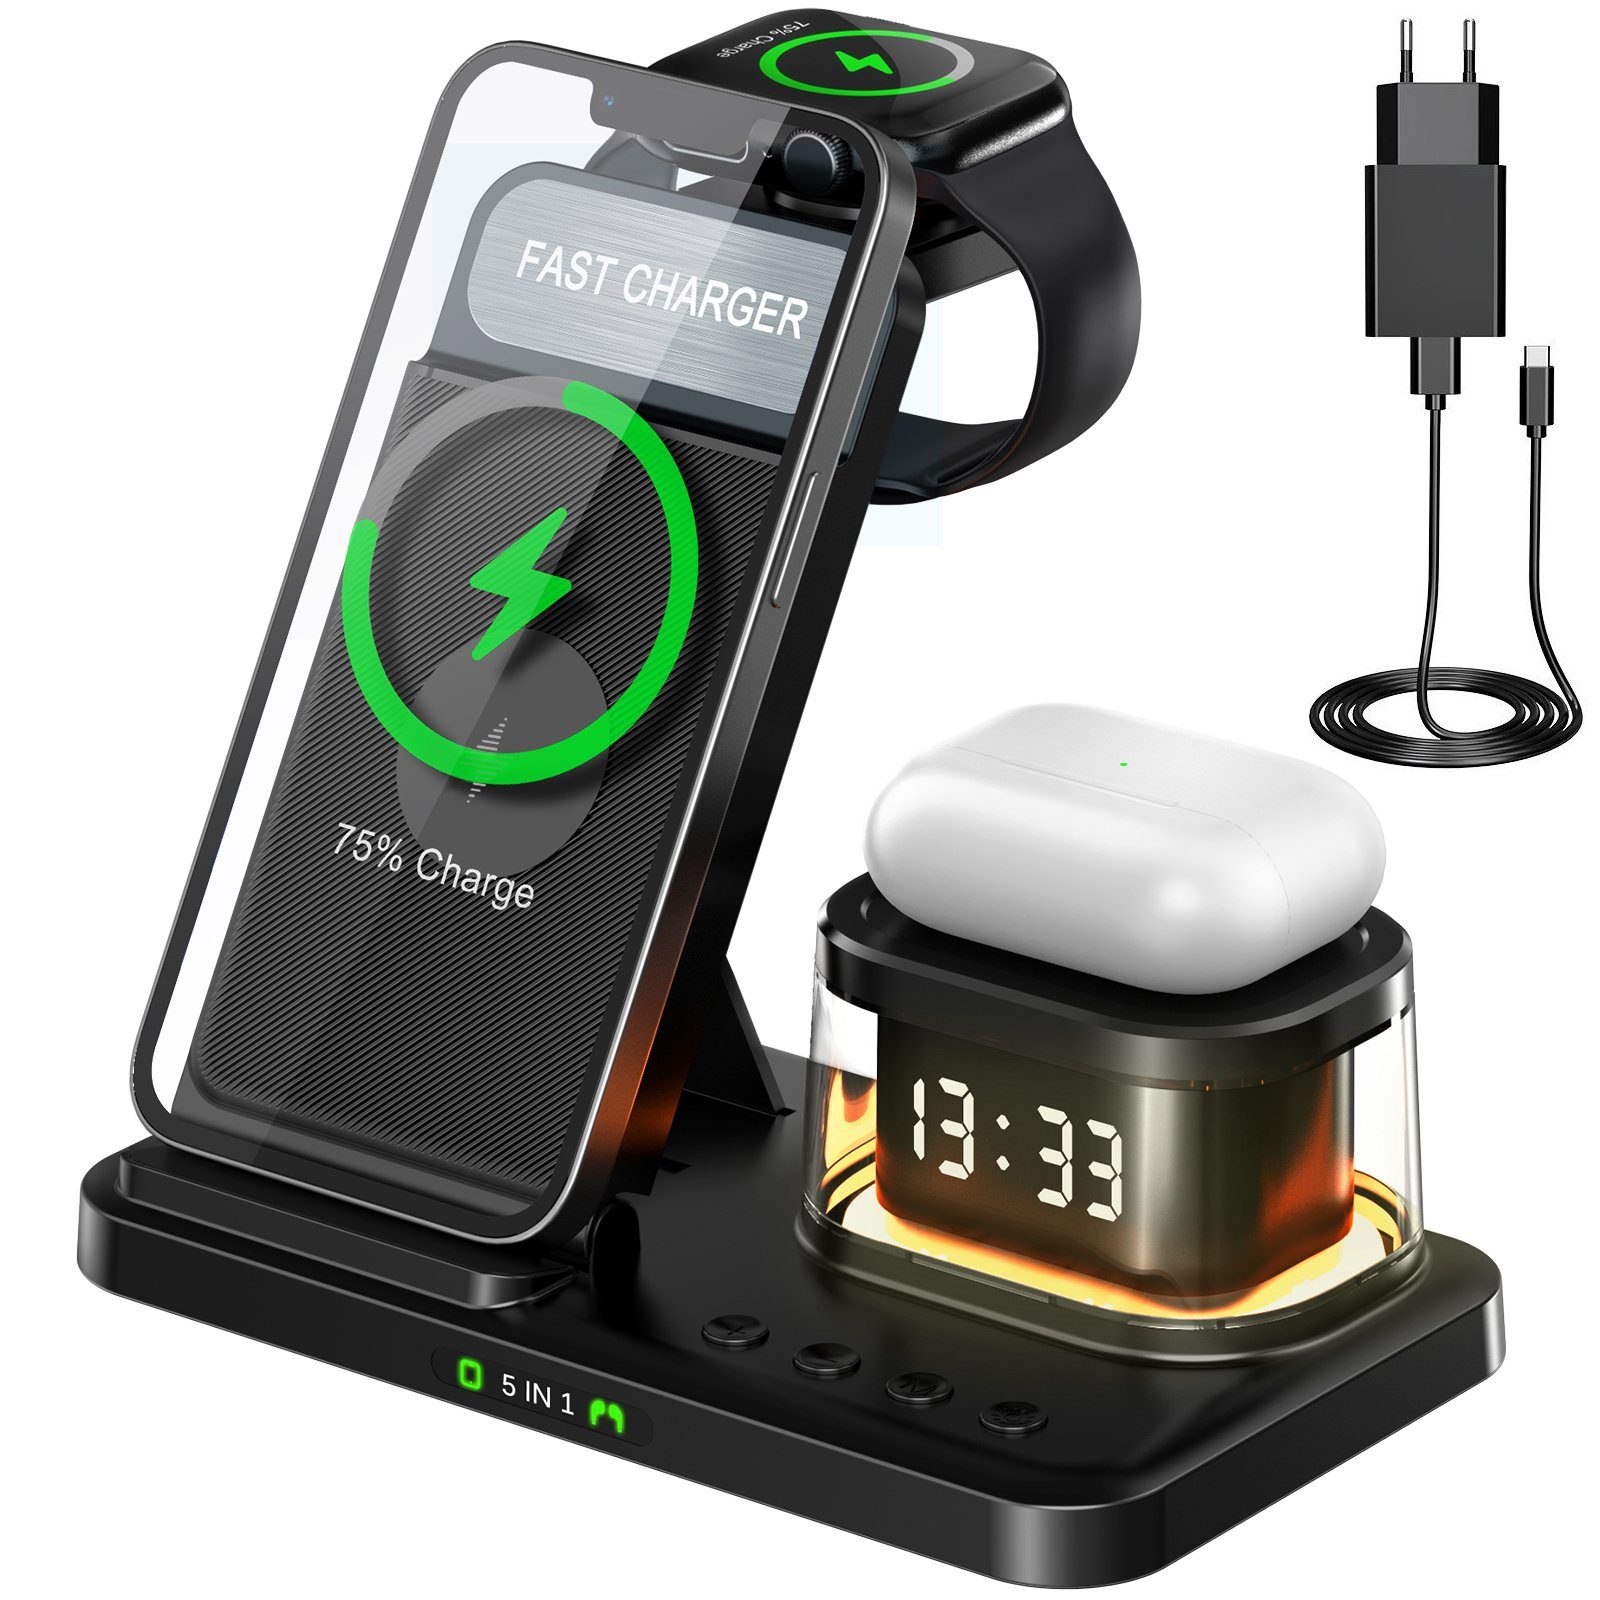 Anker PowerWave Magnetic Stand (iPhone 12) Weiß ab 33,90